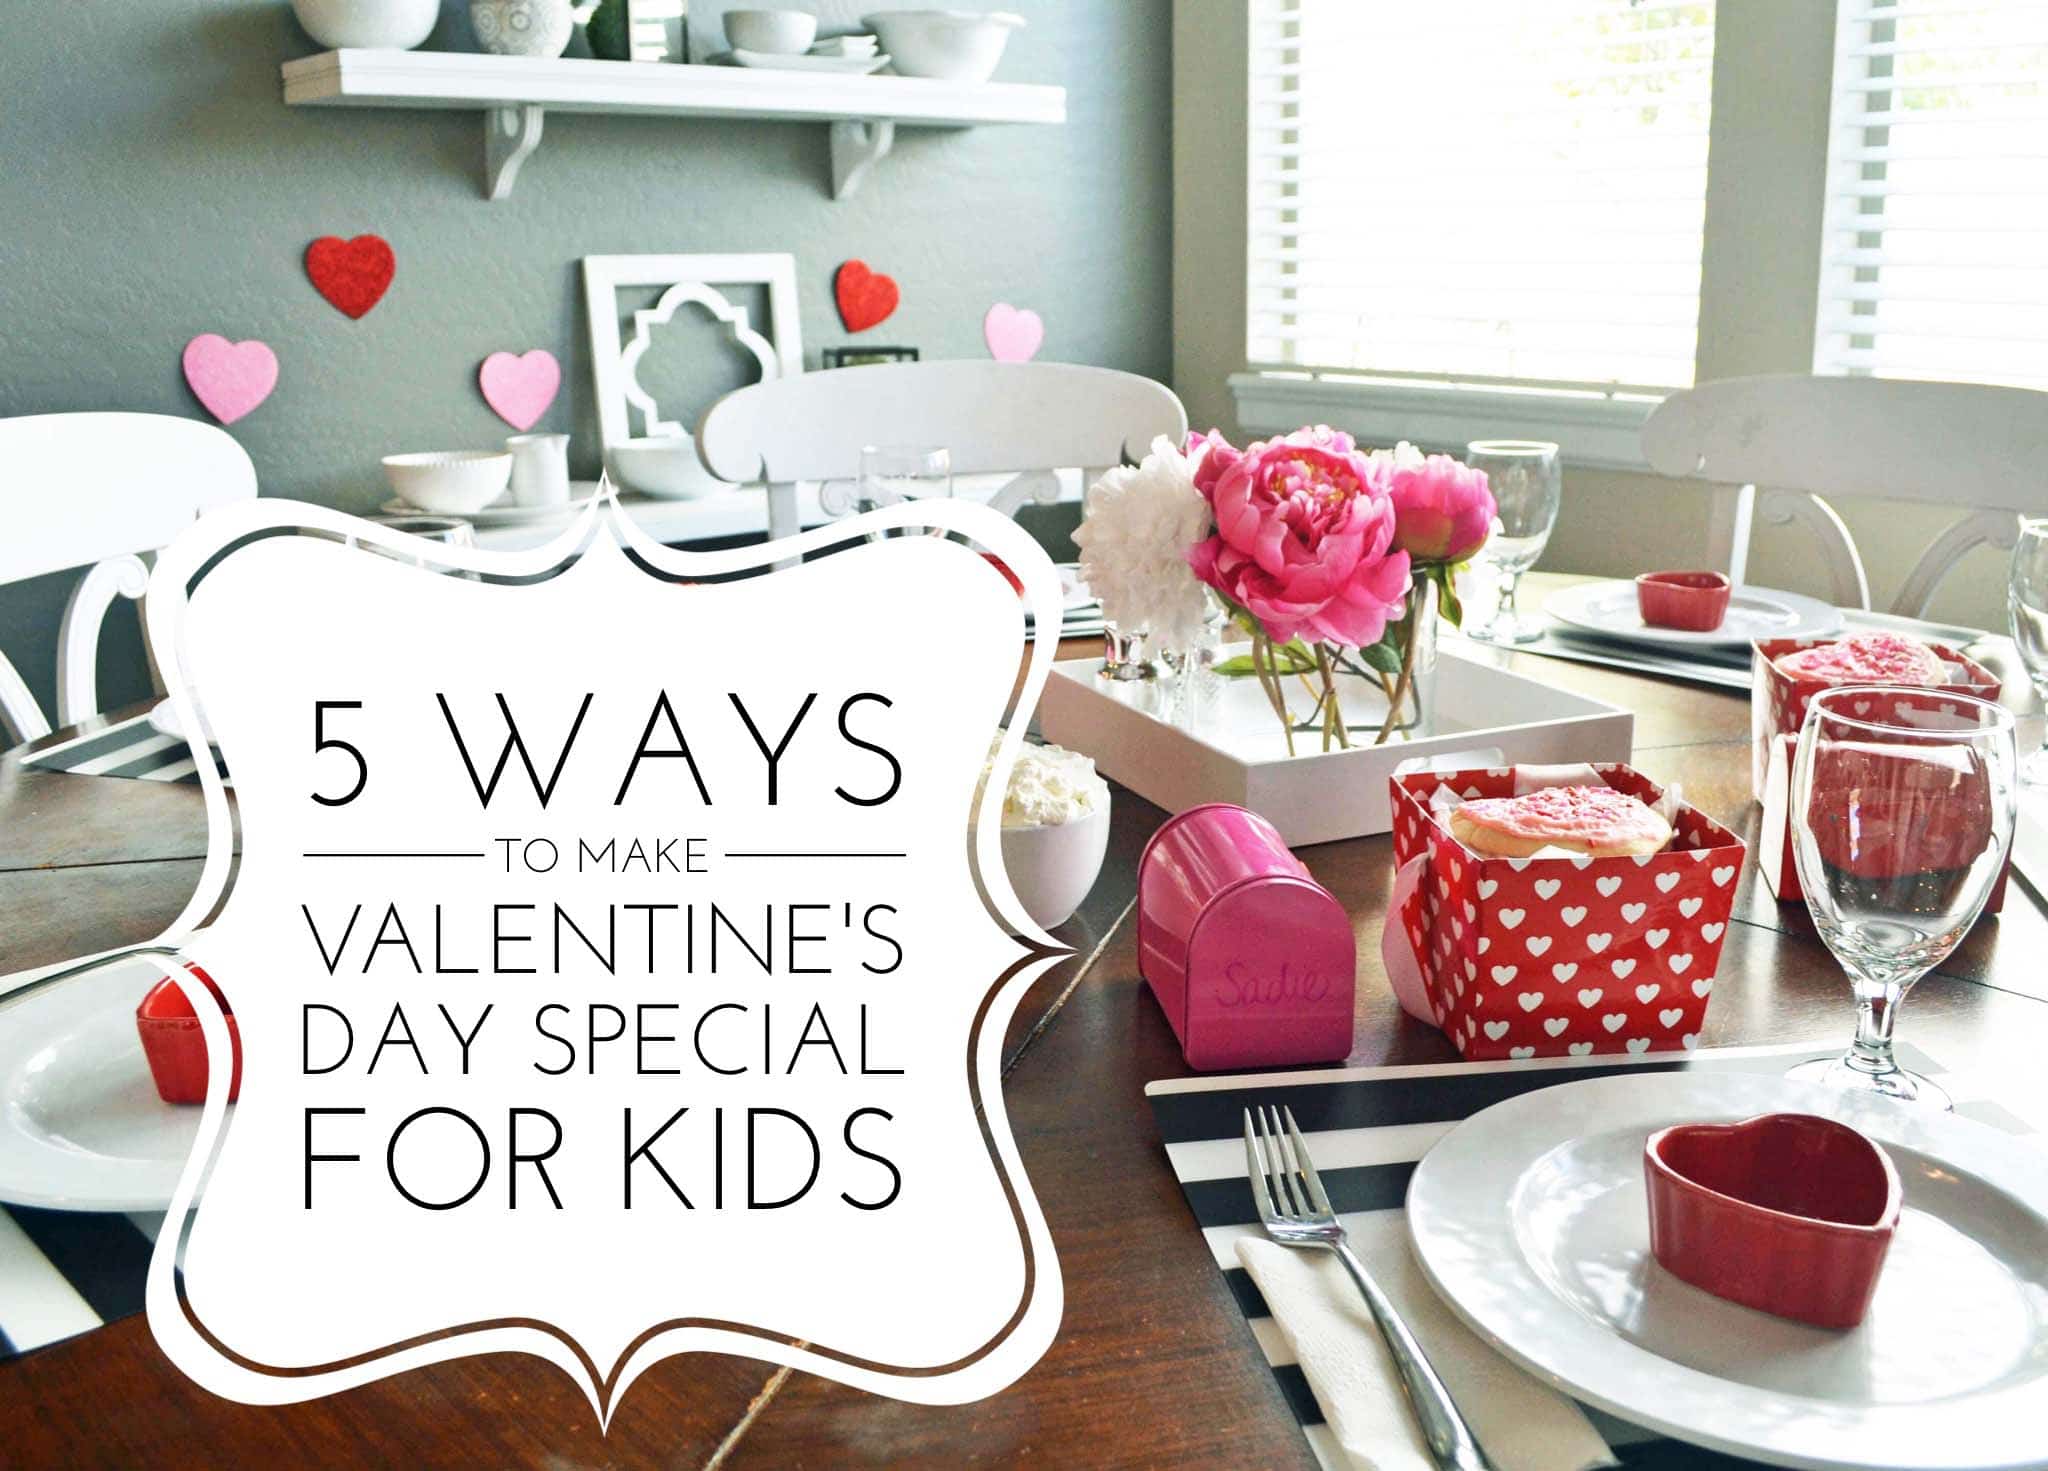 Five 5 Ways to Make Valentine's Day special for kids. Ideas on how to make Valentine's Day fun for families. Valentine's Day letters, Valentine's Day special breakfast, Valentine's Day tablescapes, Valentine's Day decor ideas, EASY Valentine's day photo shoot, Valentine's day printables, and Valentine's Day cookies. https://www.modernhoney.com